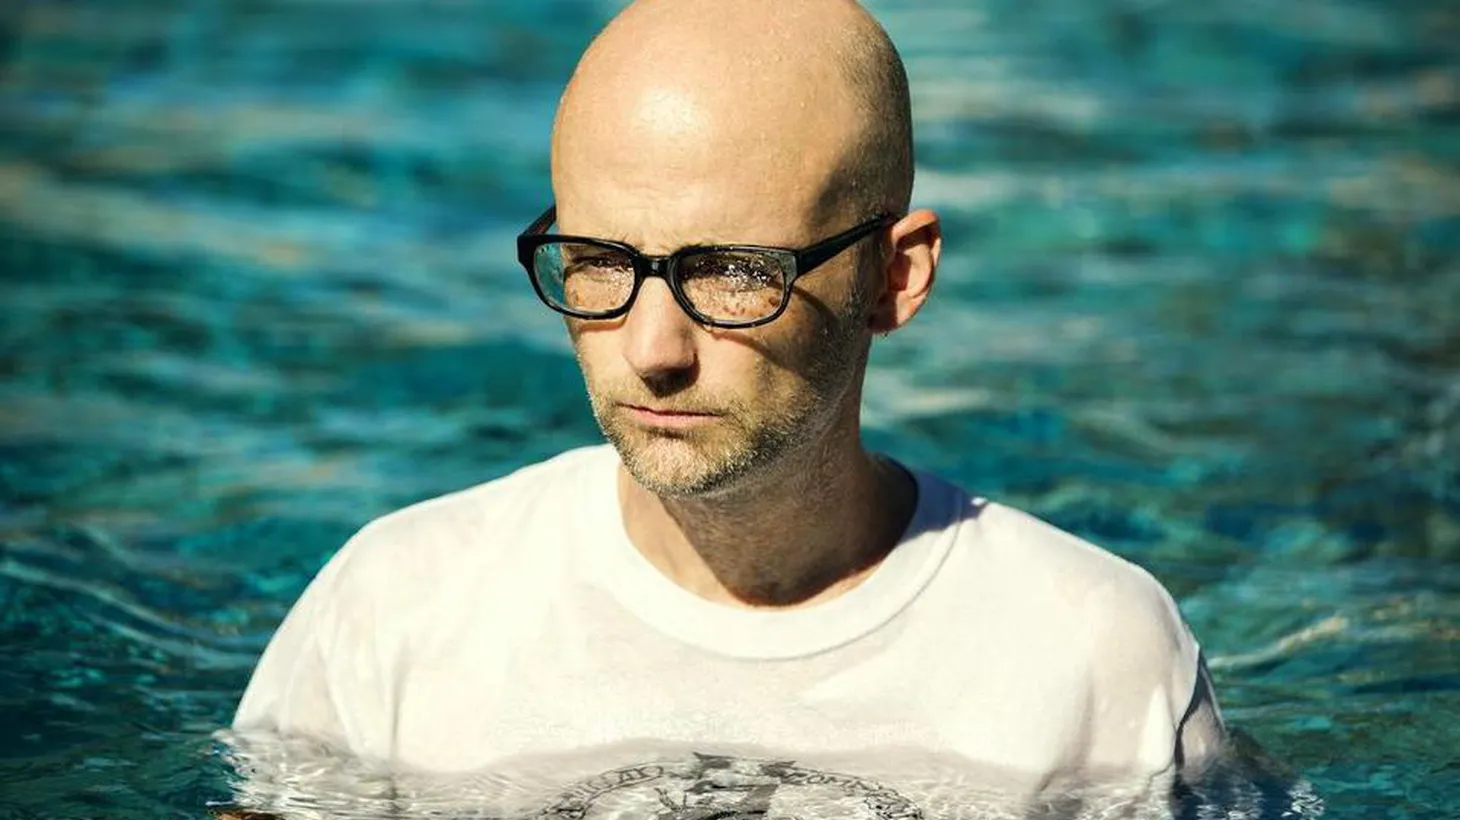 An honorary member of the KCRW family, Moby brings a full band and lots of surprises to KCRW.